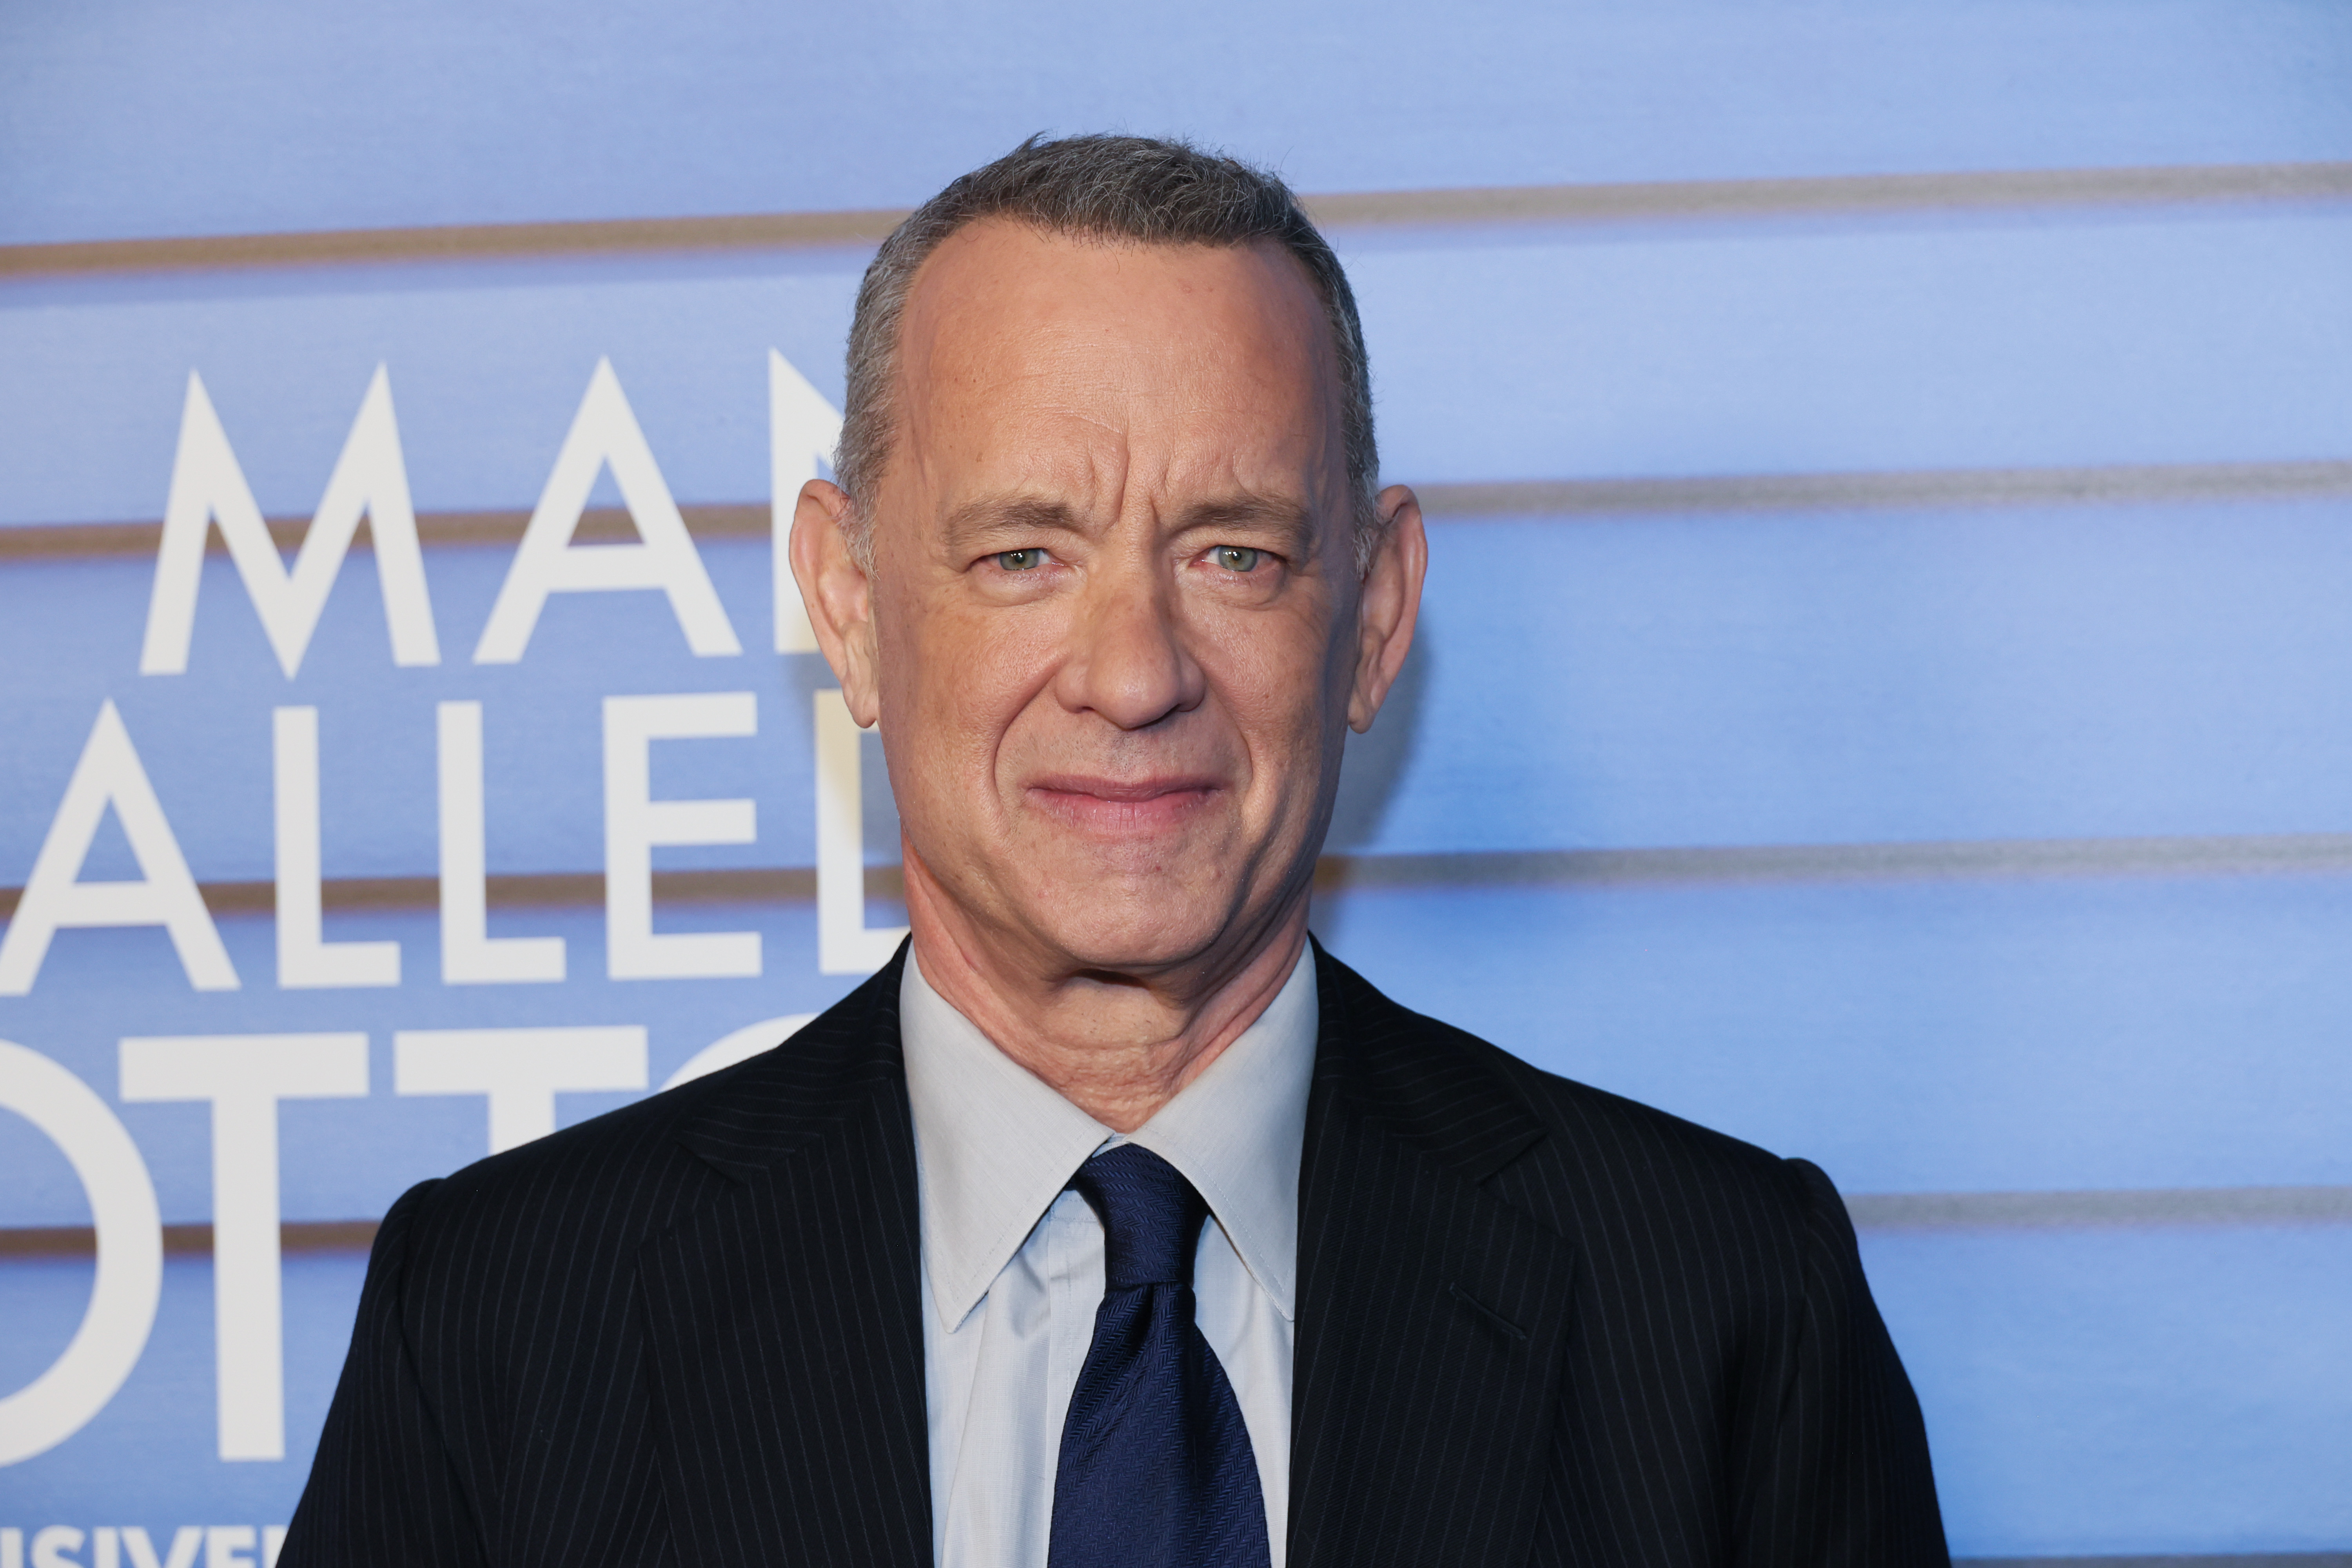 Tom Hanks at the screening of "A Man Called Otto" on January 9, 2023, in New York City. | Source: Getty Images